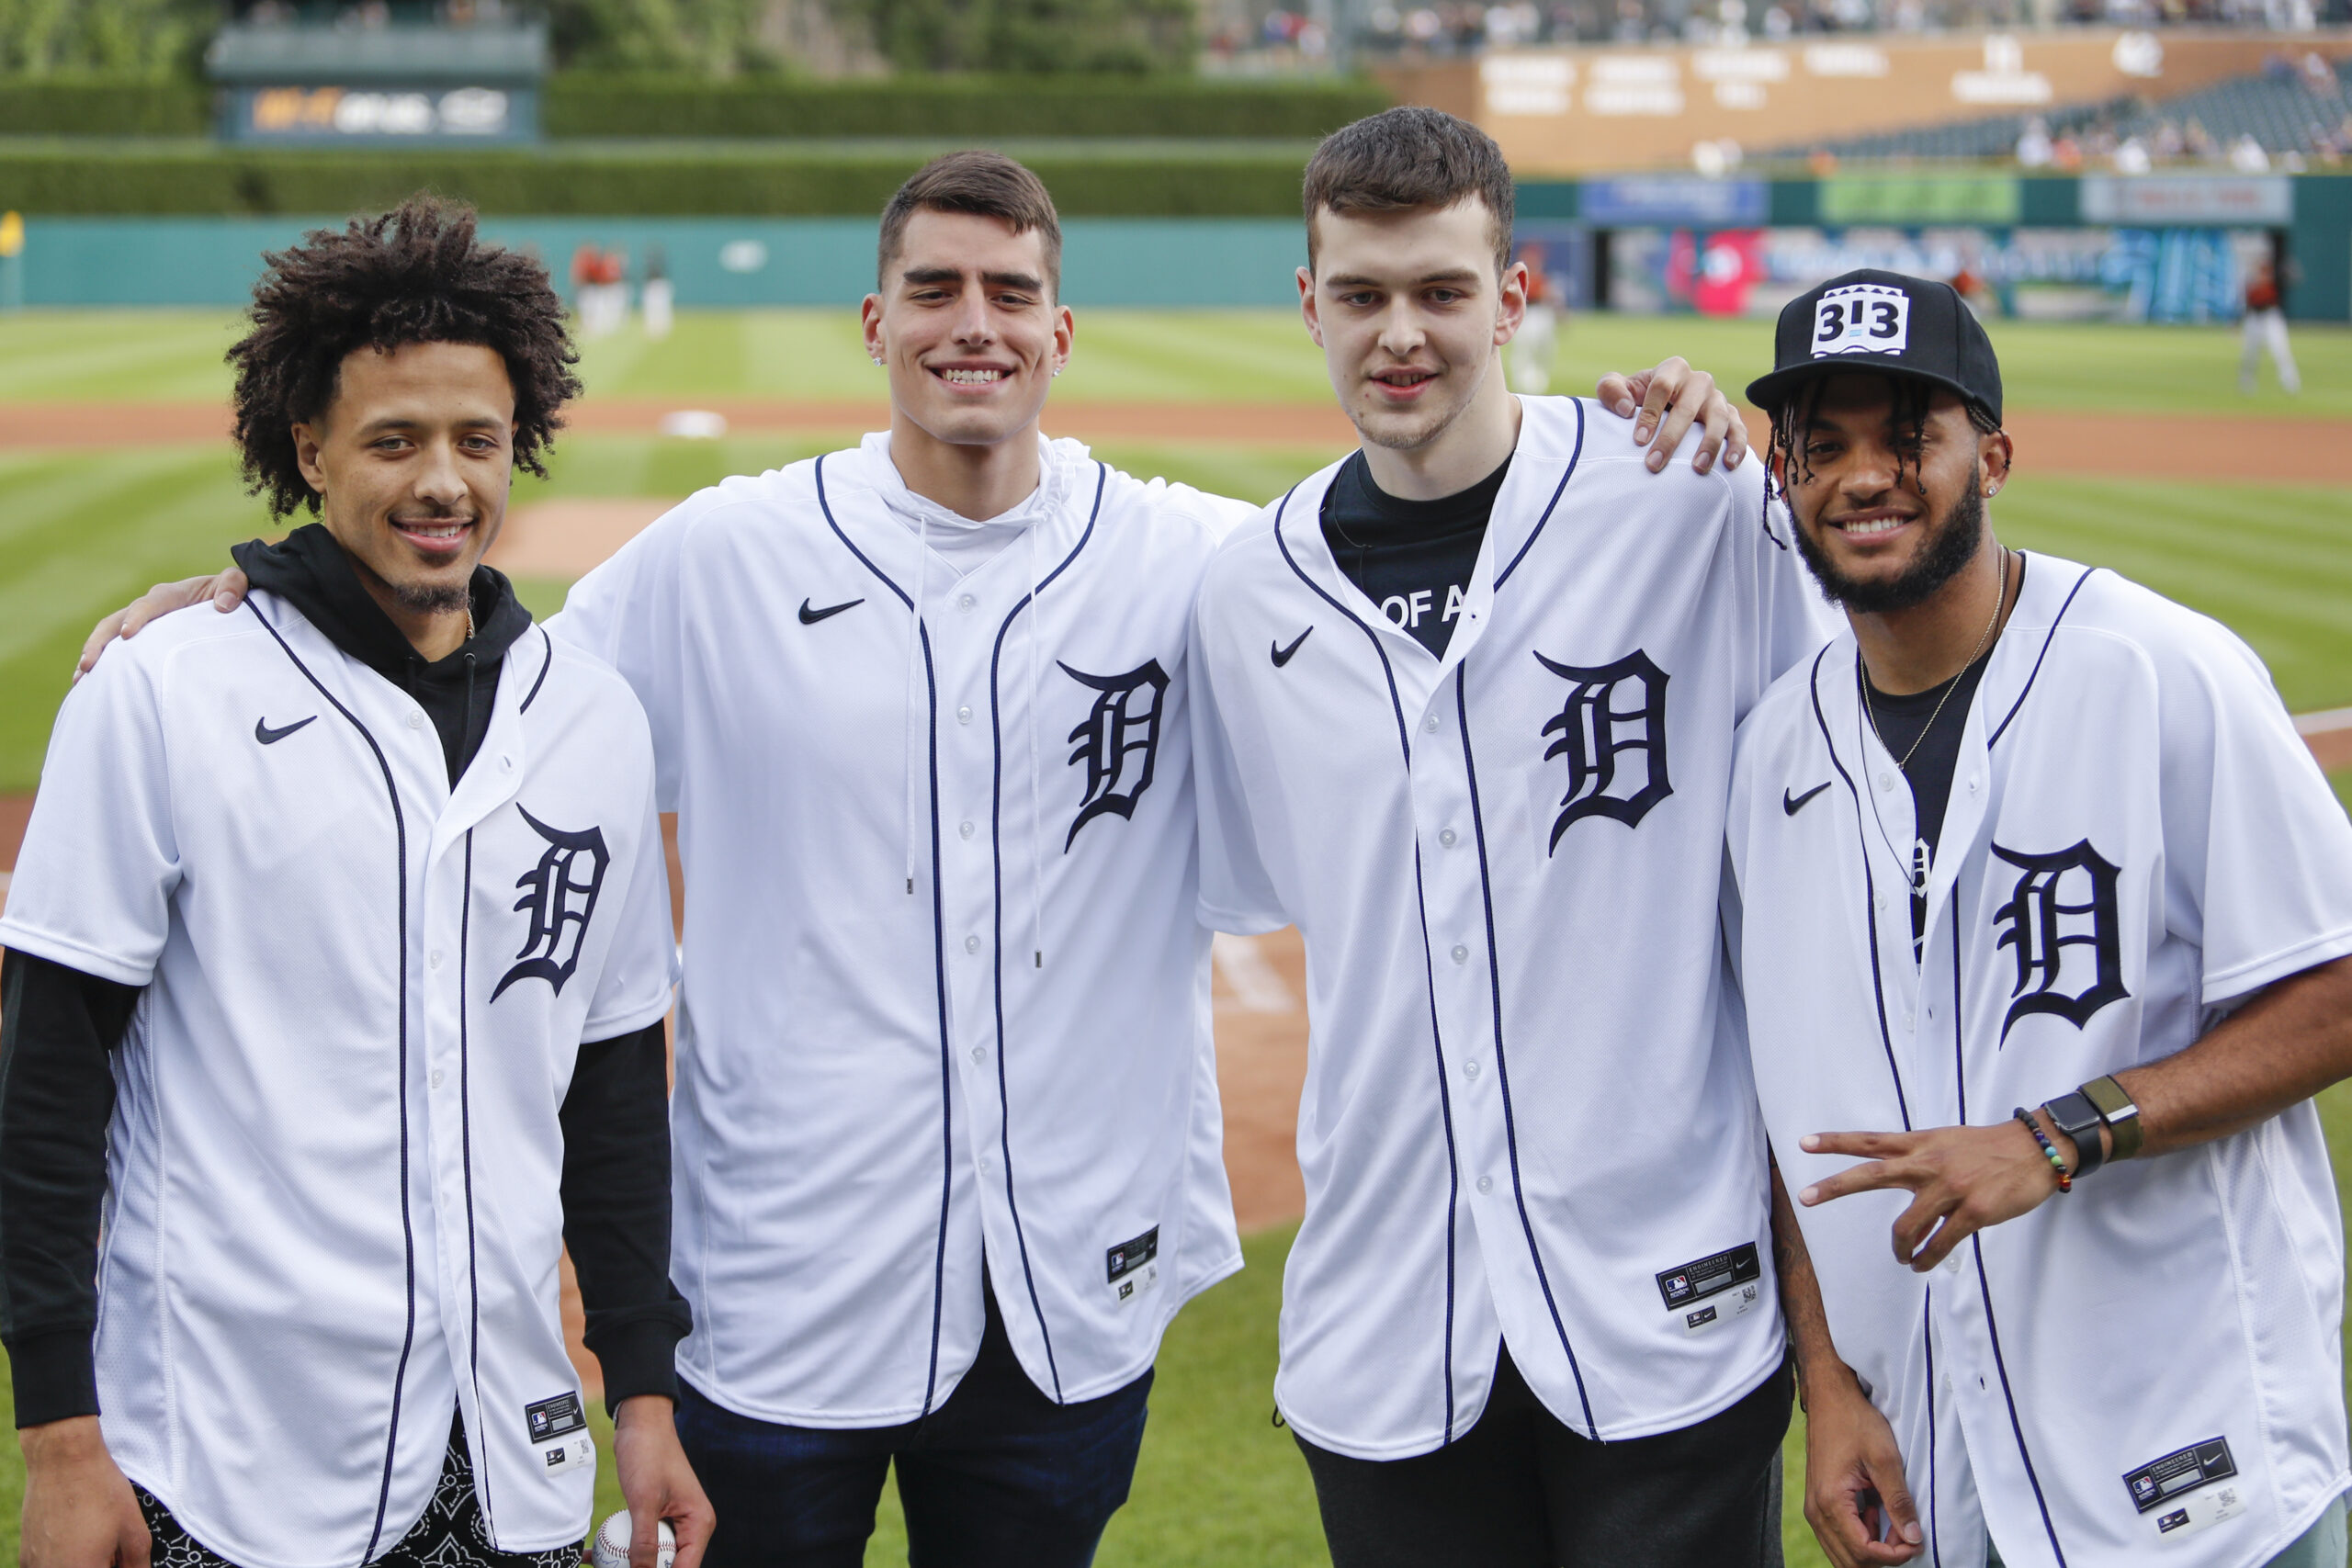 Jul 30, 2021; Detroit, Michigan, USA; (Left to right) Detroit Pistons number one overall draft pick Cade Cunningham number three pick Luka Garza number four pick Balsa Koprivica and number two pick Isaiah Livers smile for a photo before the game between the Detroit Tigers and the Baltimore Orioles at Comerica Park. Mandatory Credit: Raj Mehta-USA TODAY Sports. Article by Brandon Dent